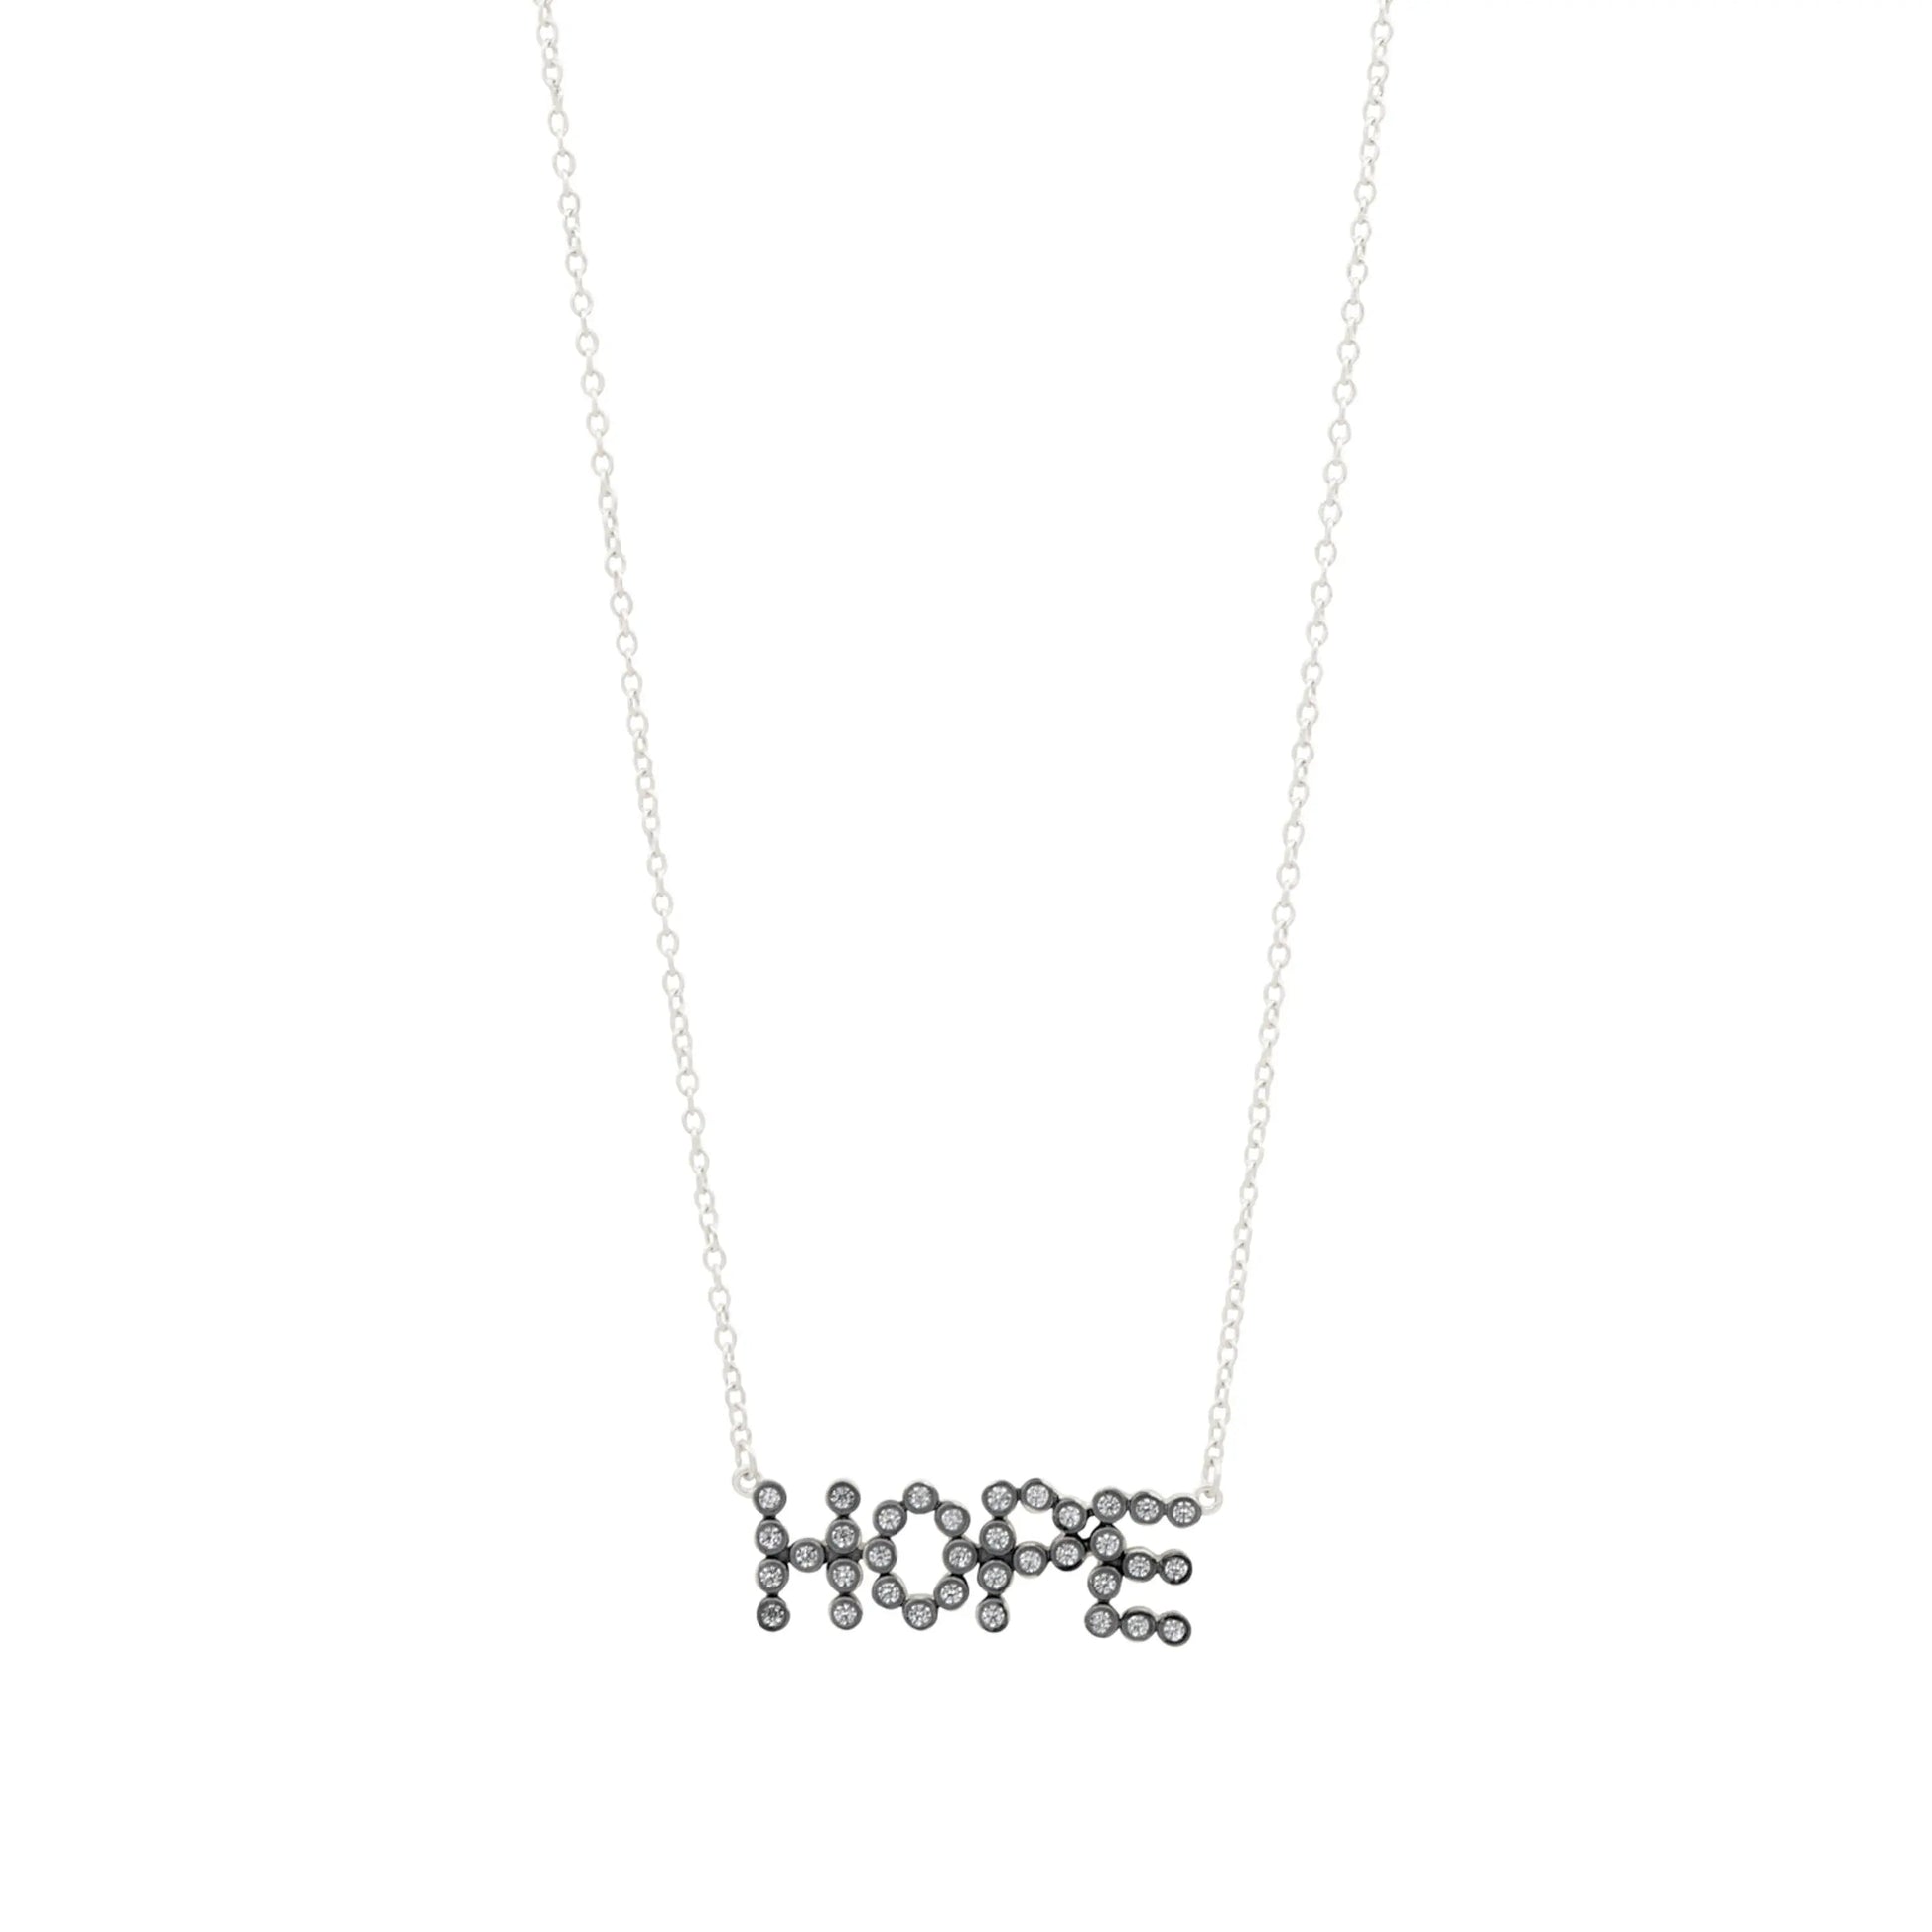 SilverBlack Sparkling Hope Necklace Women of Strength NECKLACE